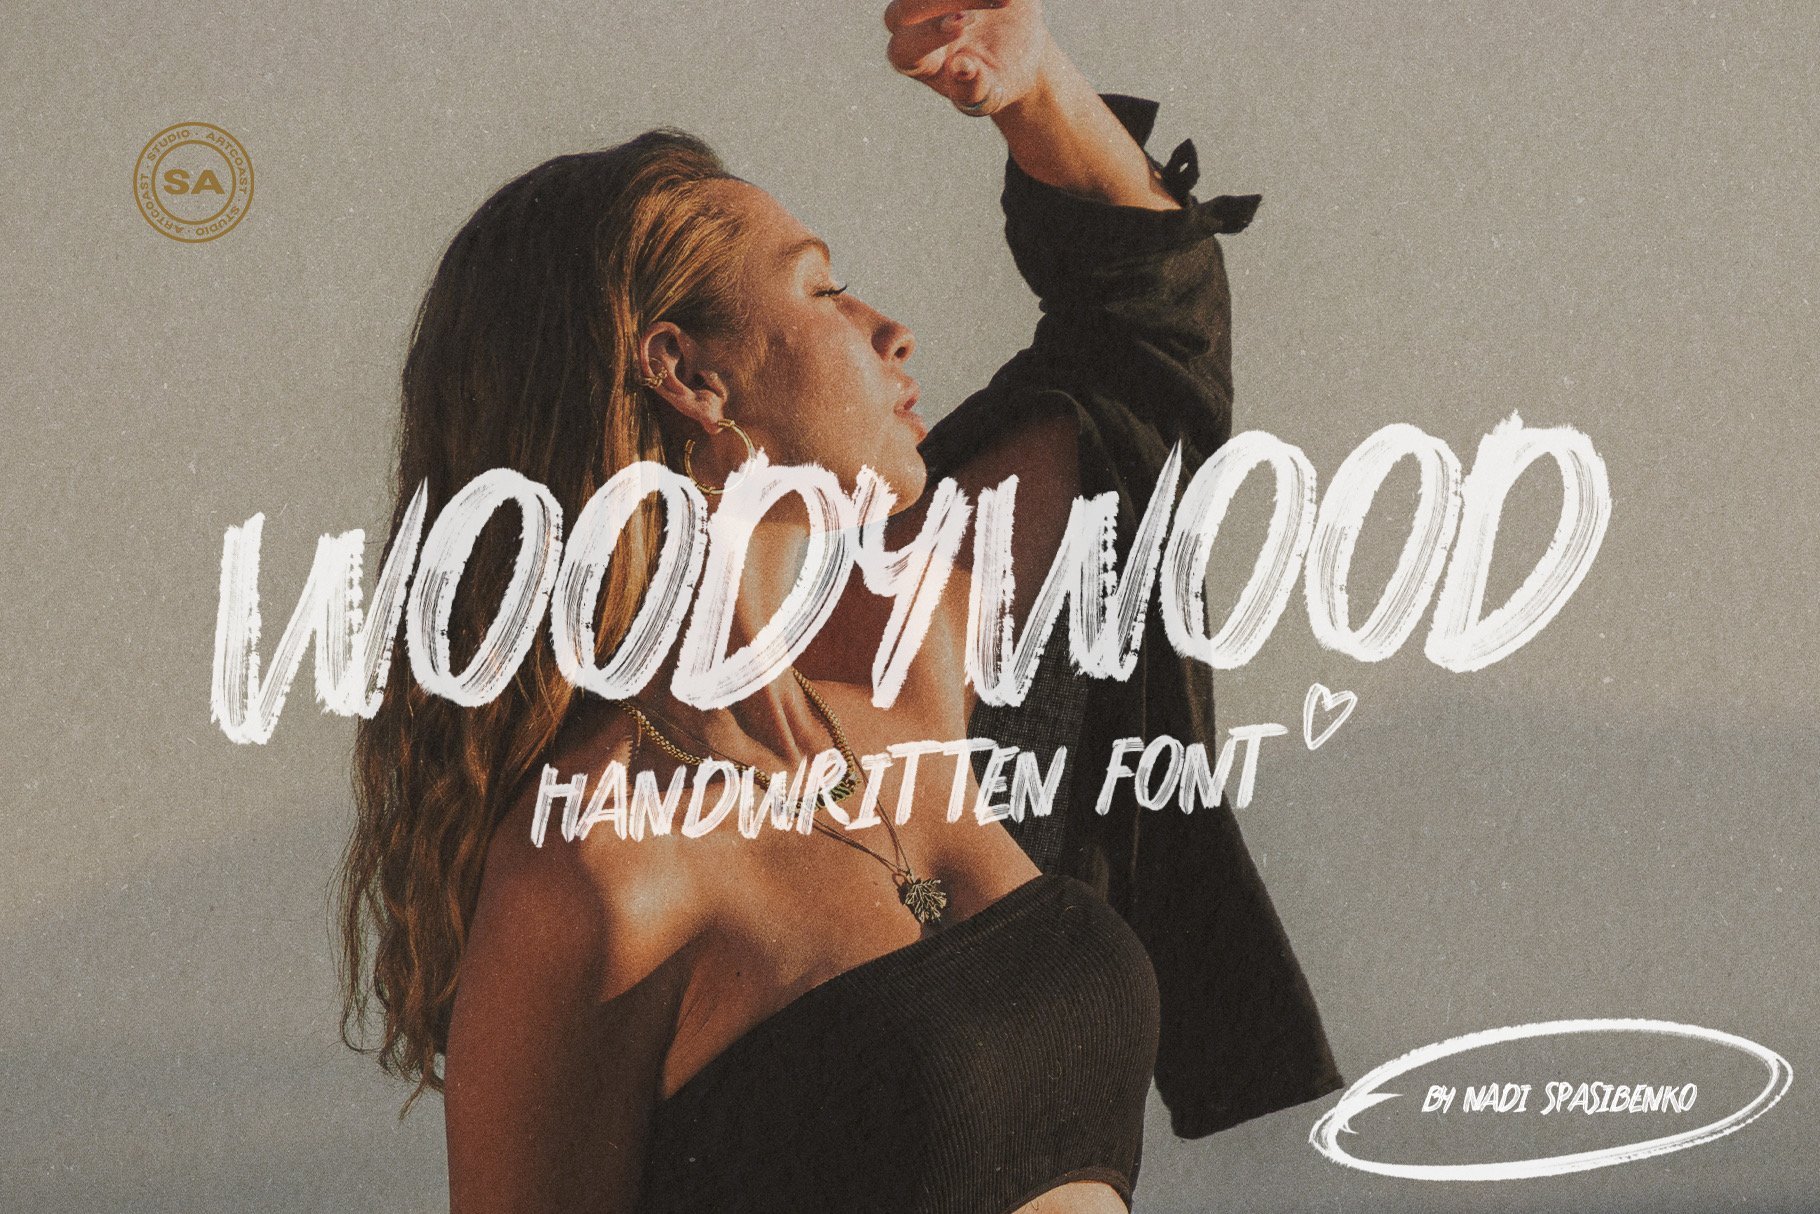 Woody Wood Font cover image.